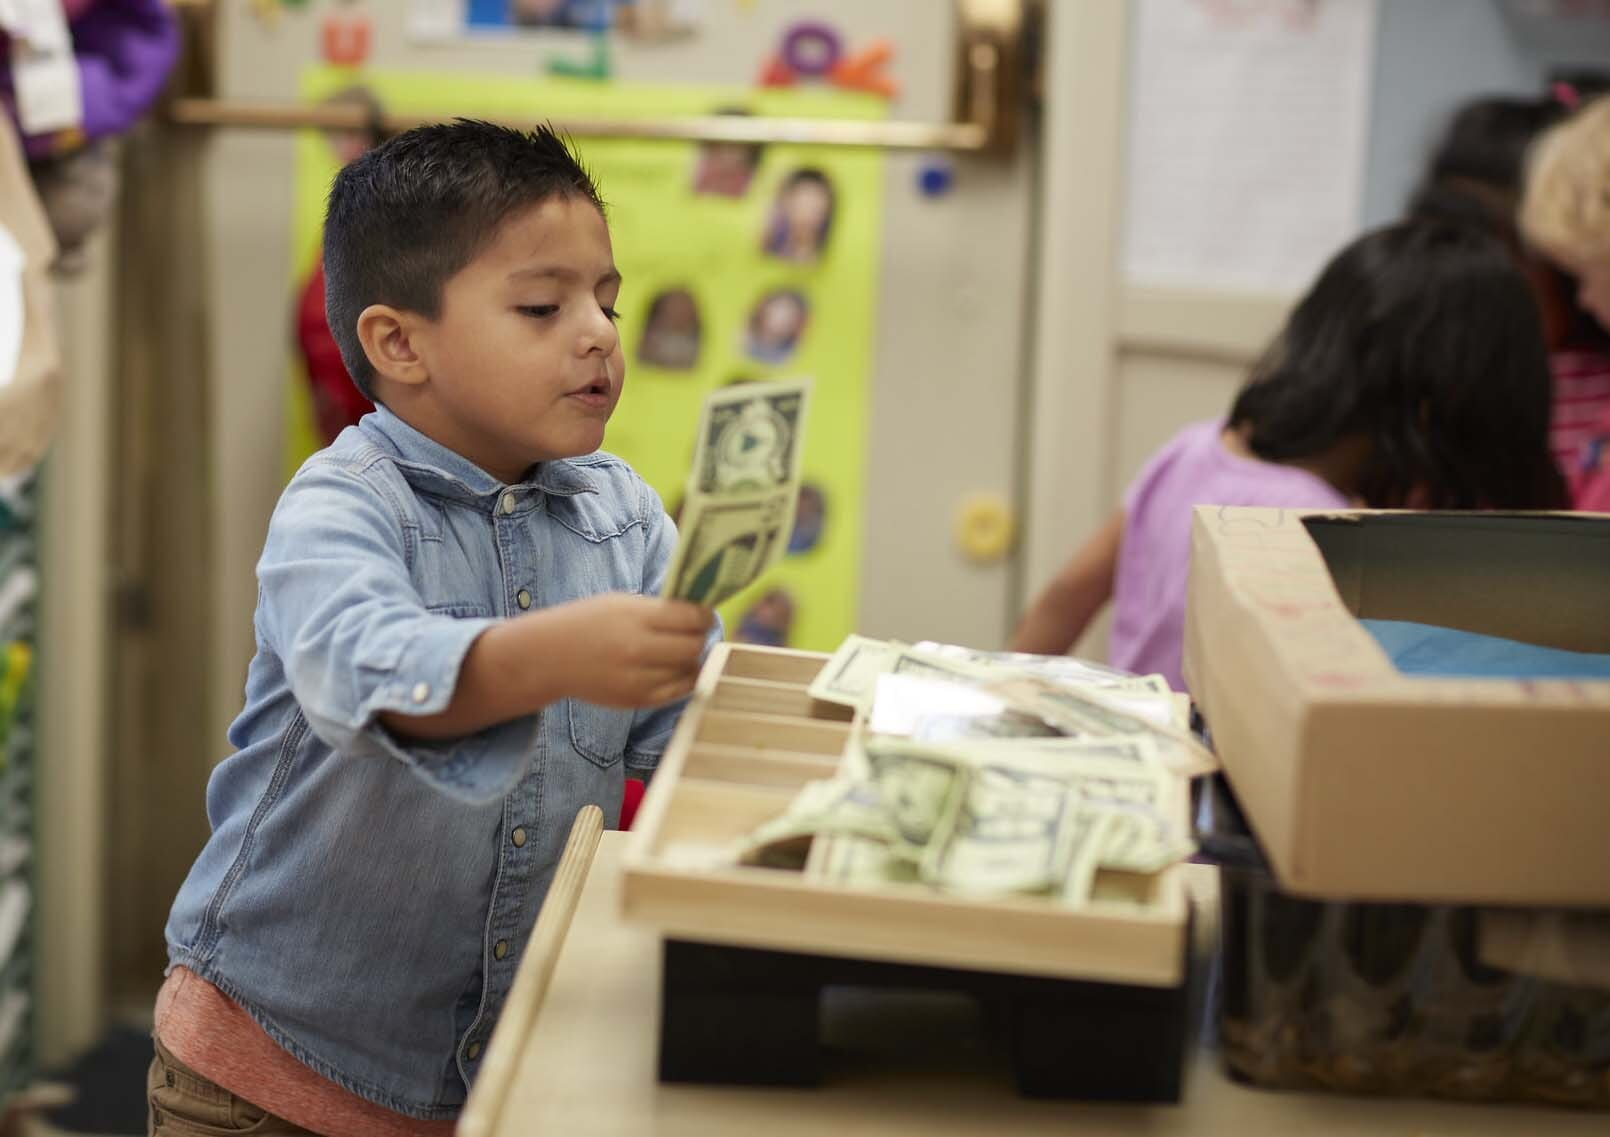 Child playing with cash register